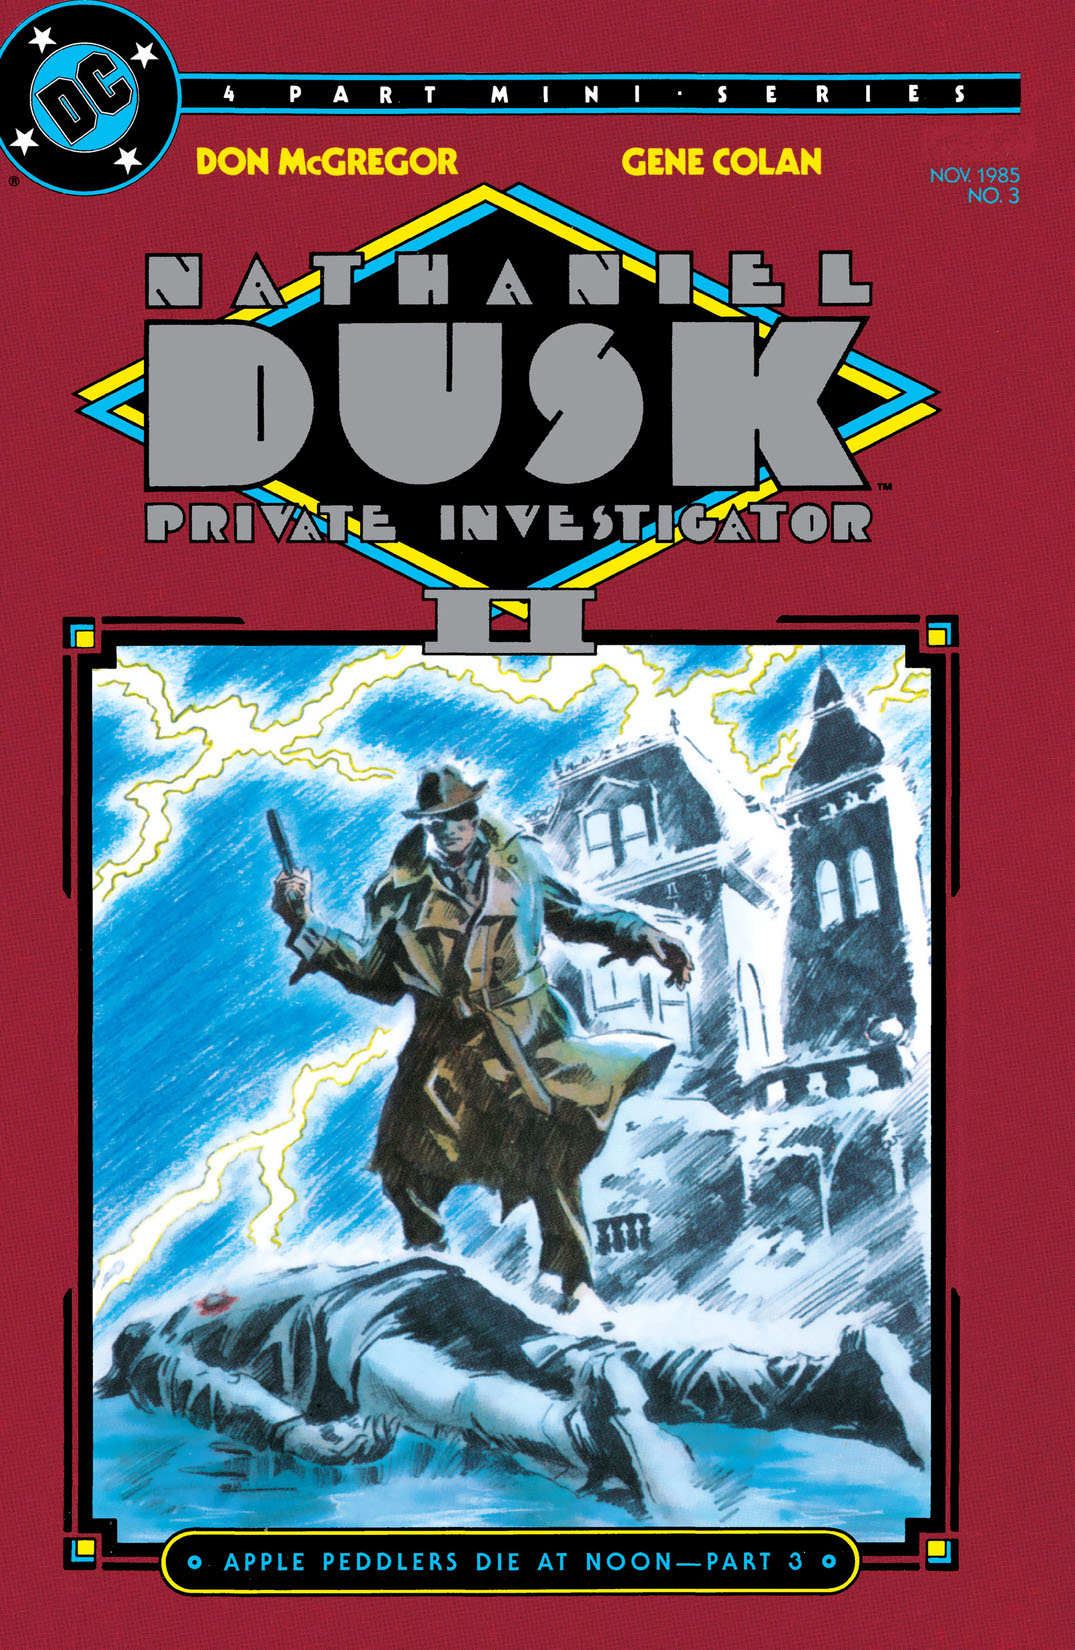 Nathaniel Dusk (1985-1986) #3 preview images